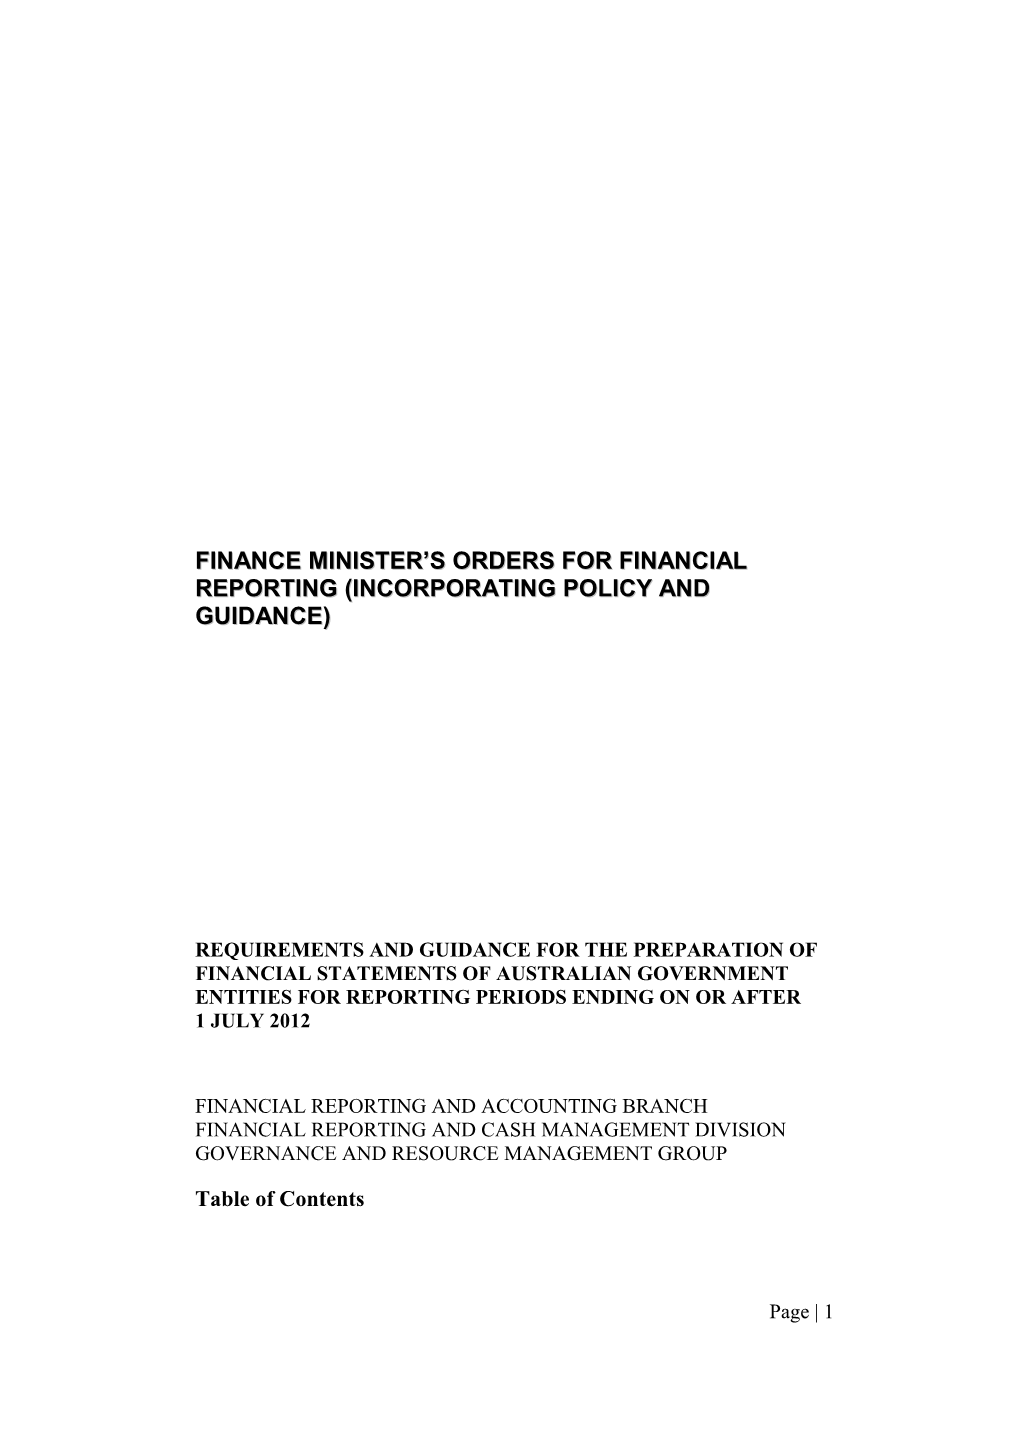 Finance Minister's Orders for Financial Reporting 2012-13